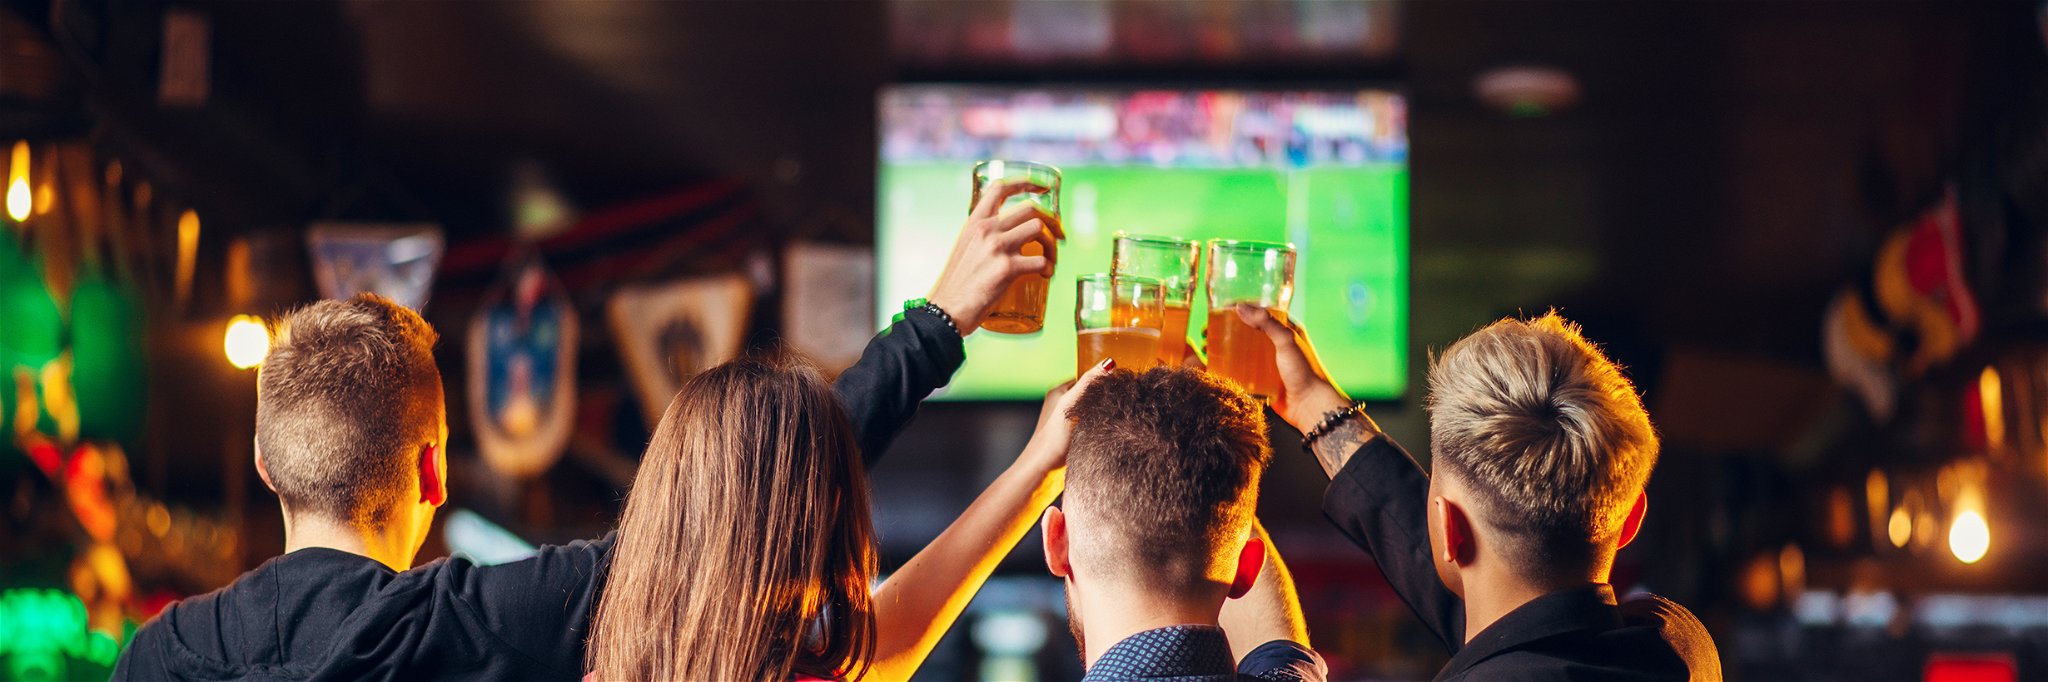 The best places in London with screenings of the games.